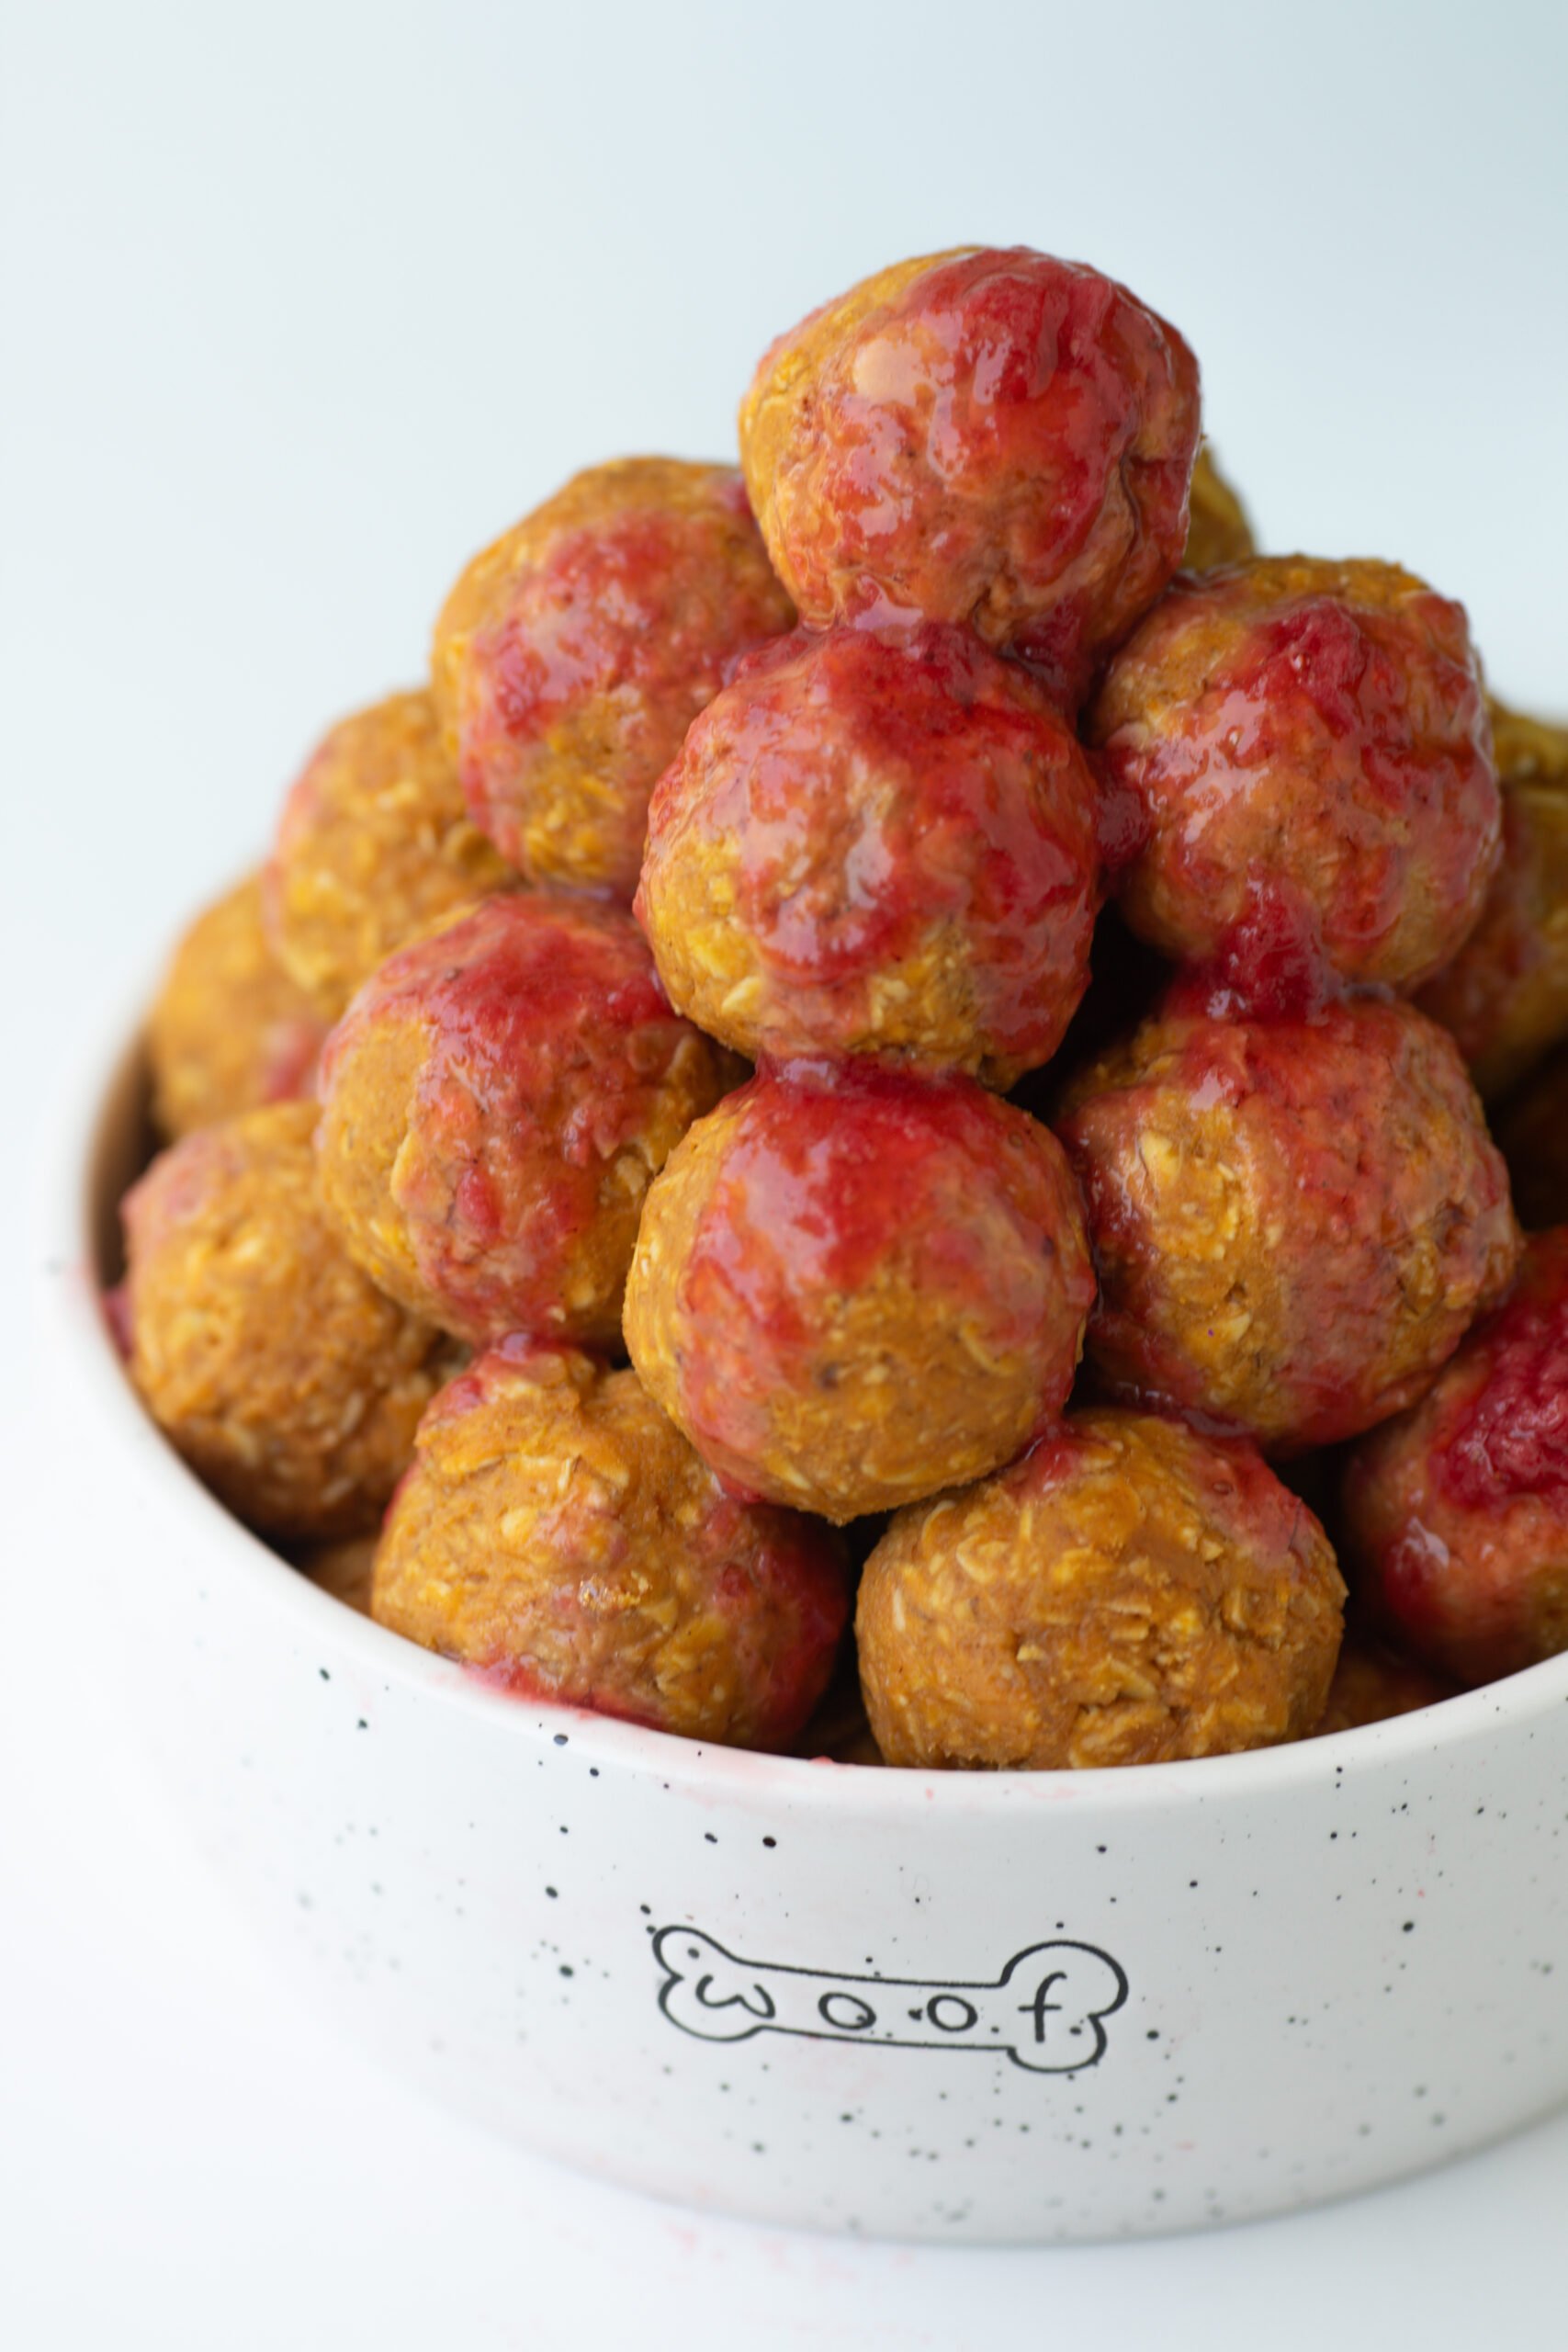 bowl of dog treats that look like meatballs but are made with oats, peanut butter and honey.